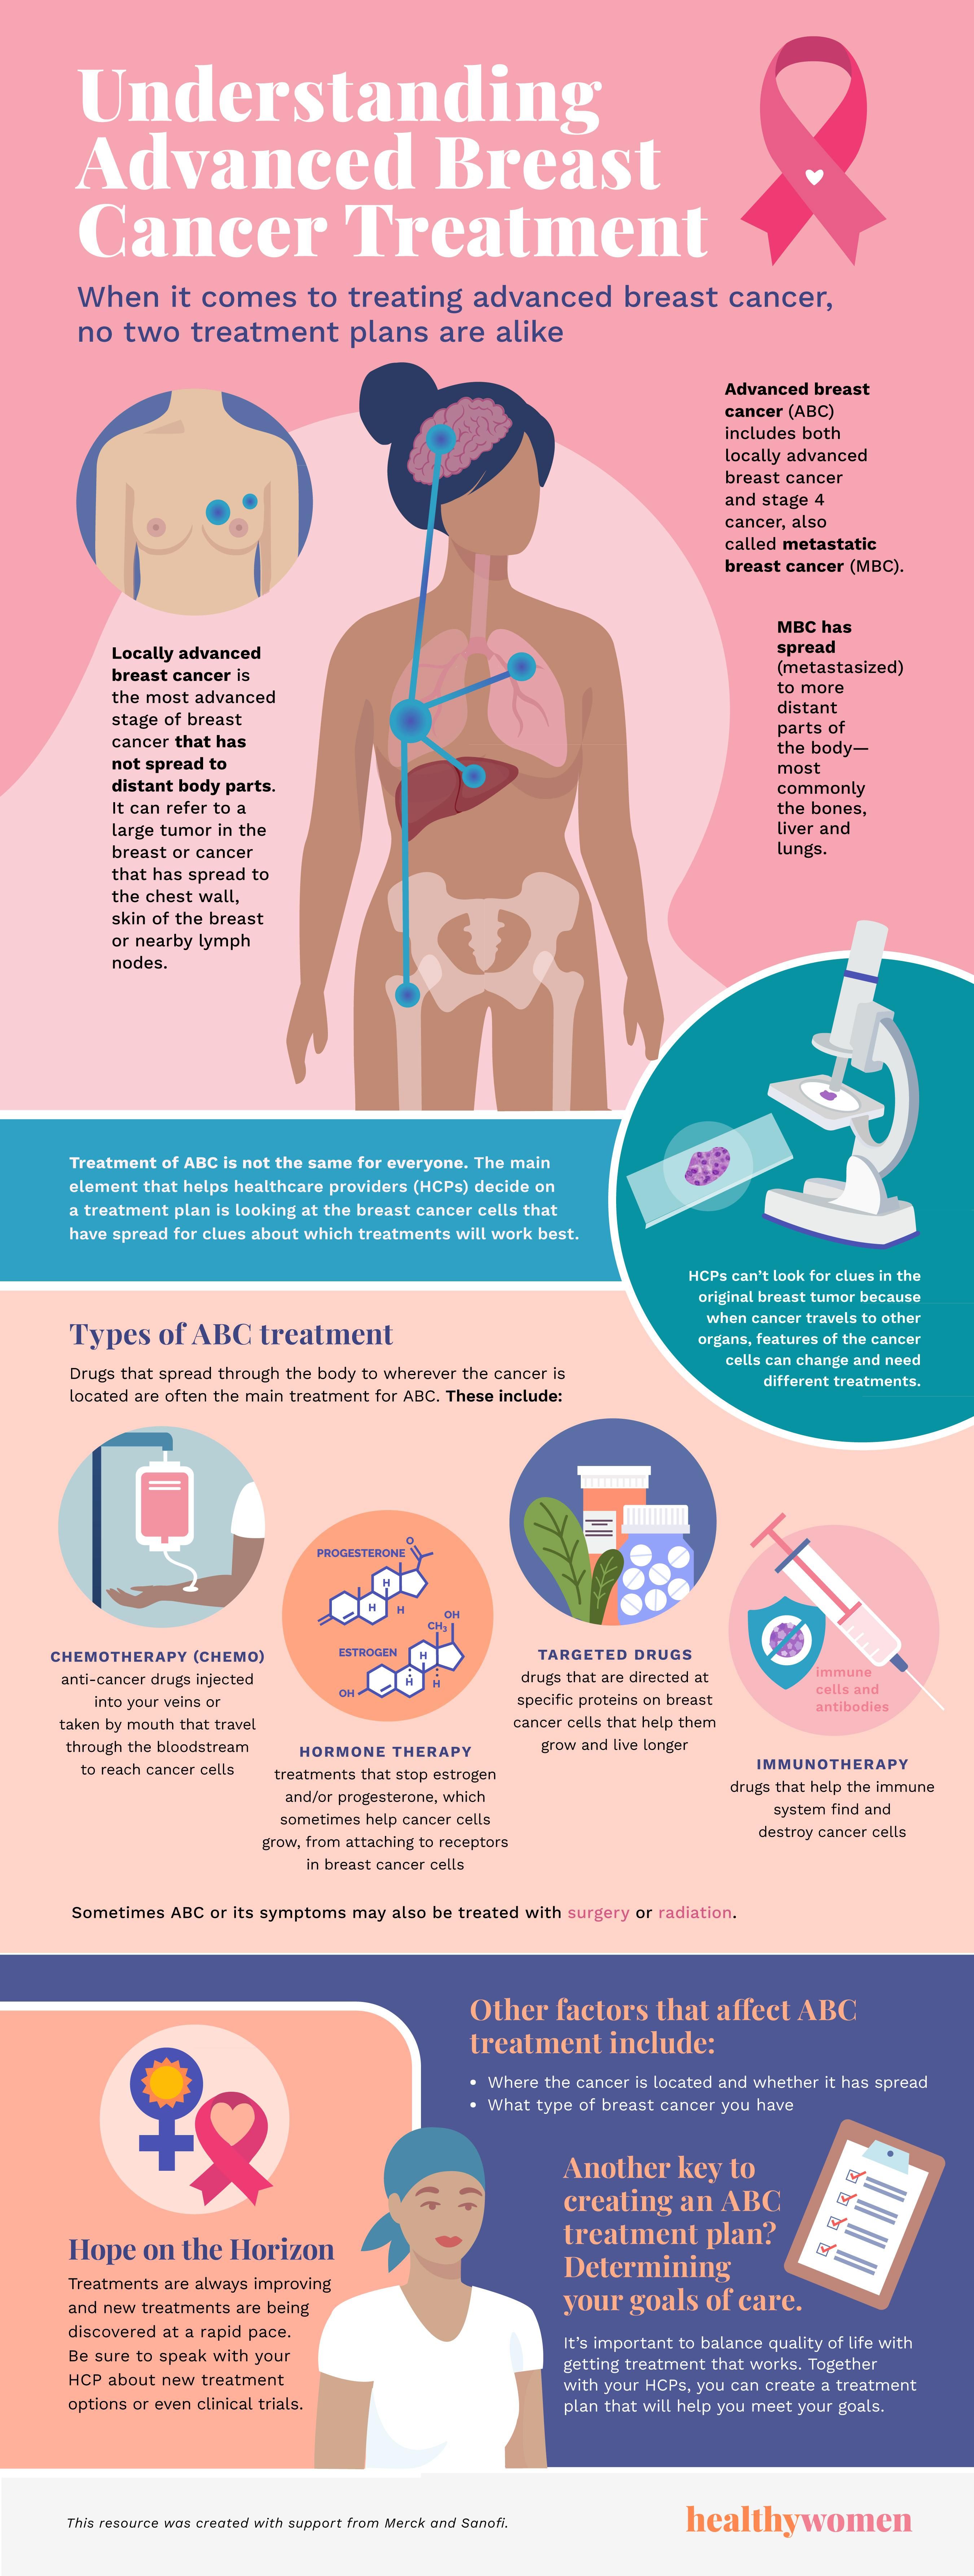 Infographic Understanding Advanced Breast Cancer Treatment. Click the image to open the PDF